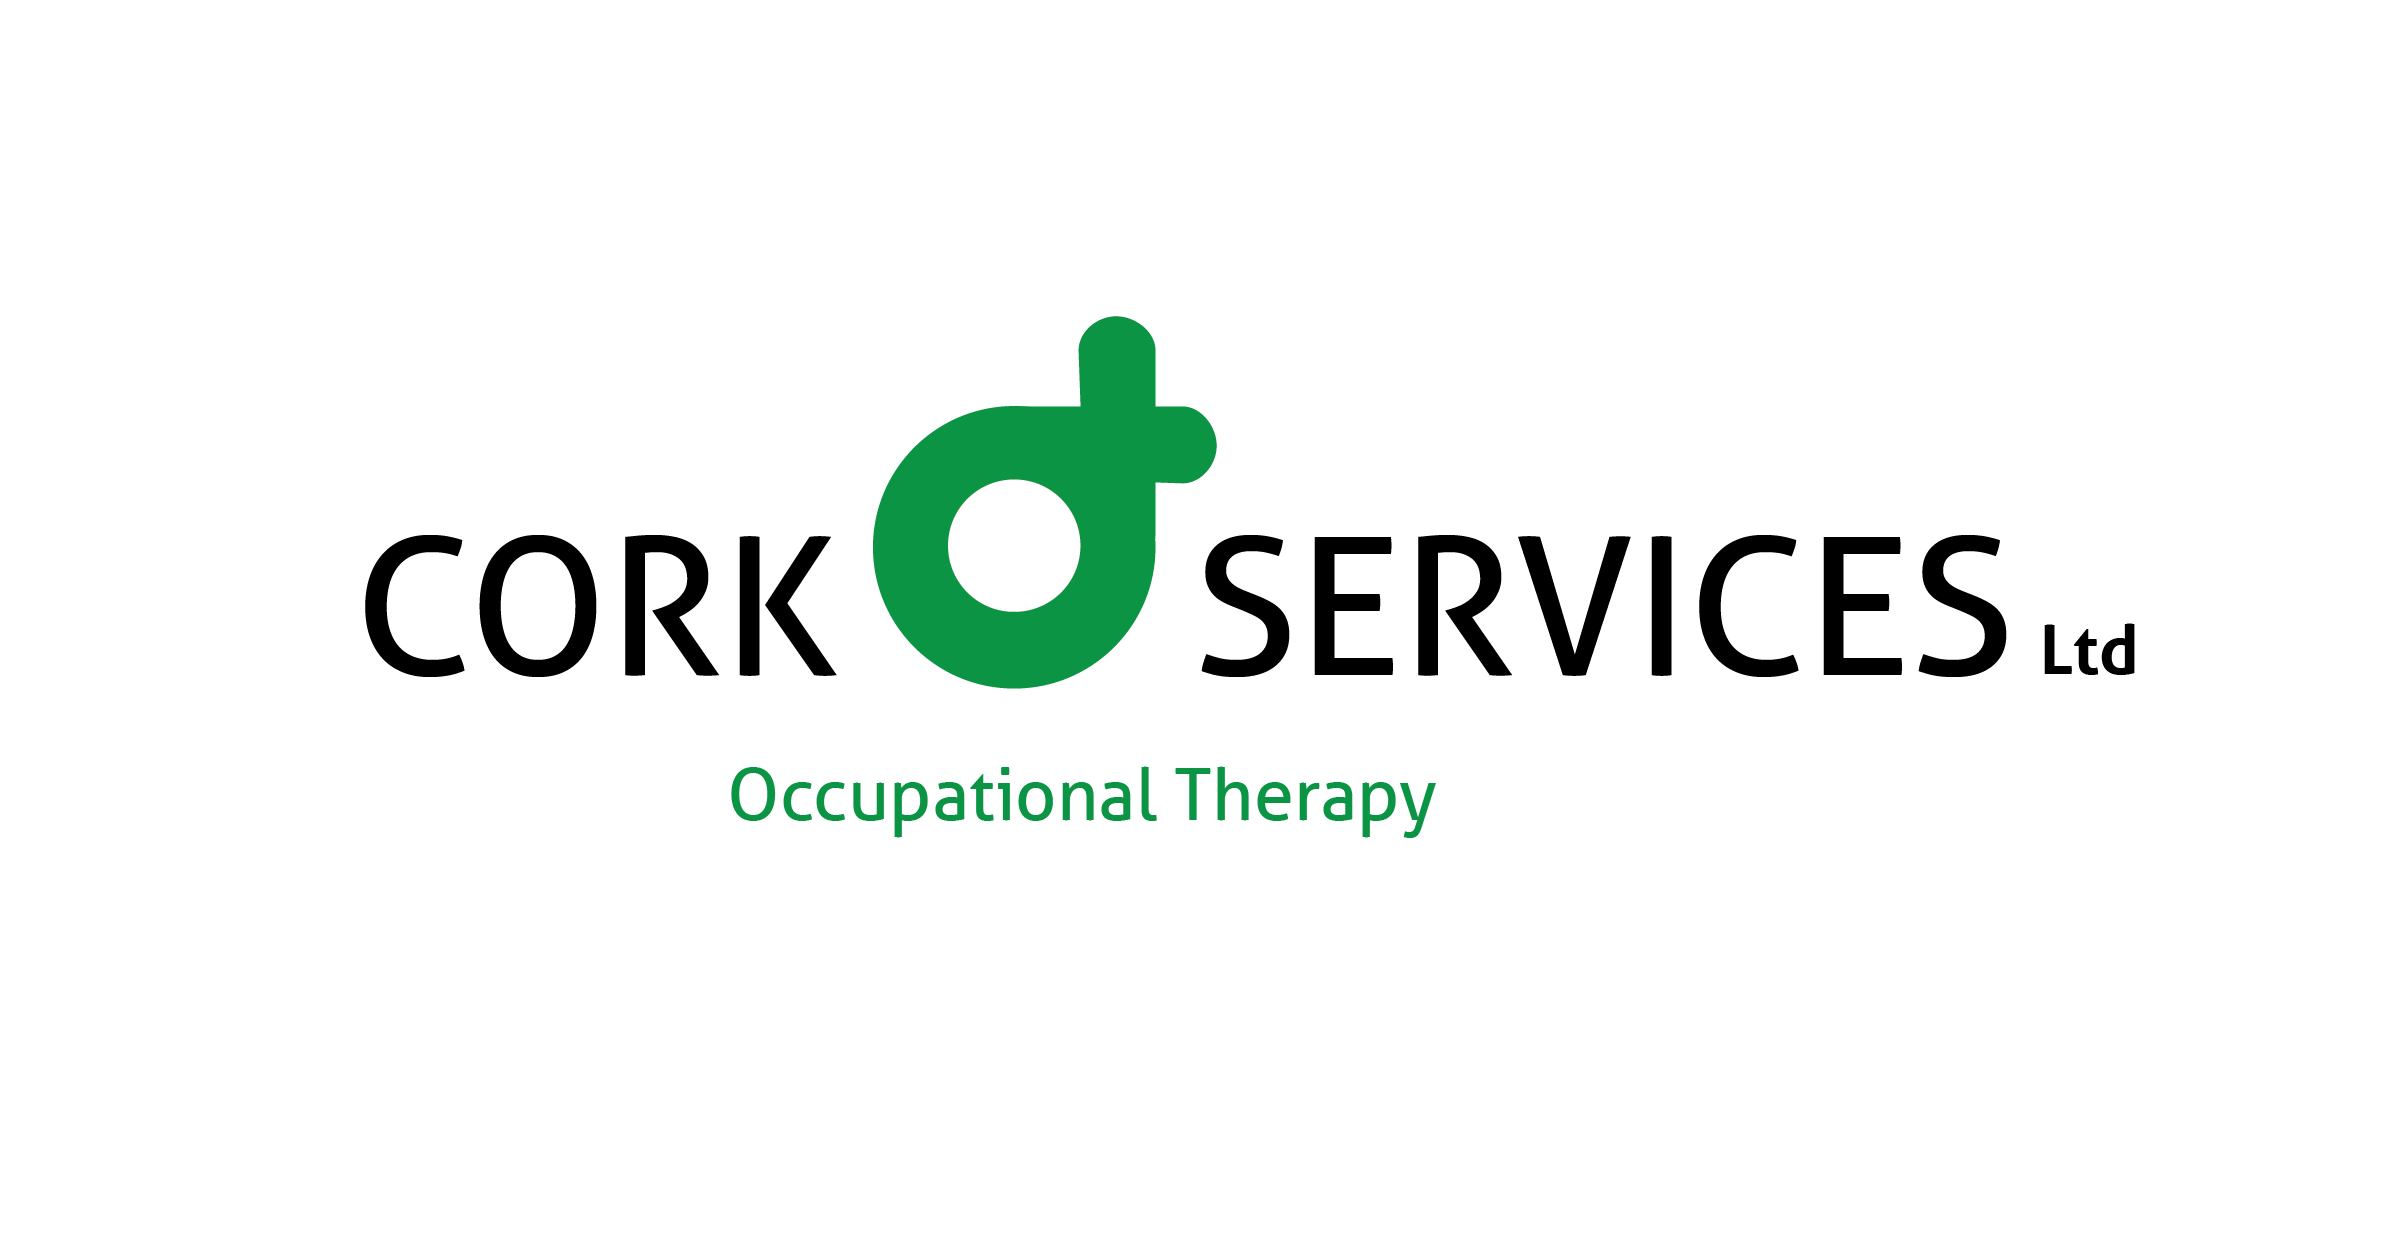 Cork Occupational Therapy Services Ltd logo